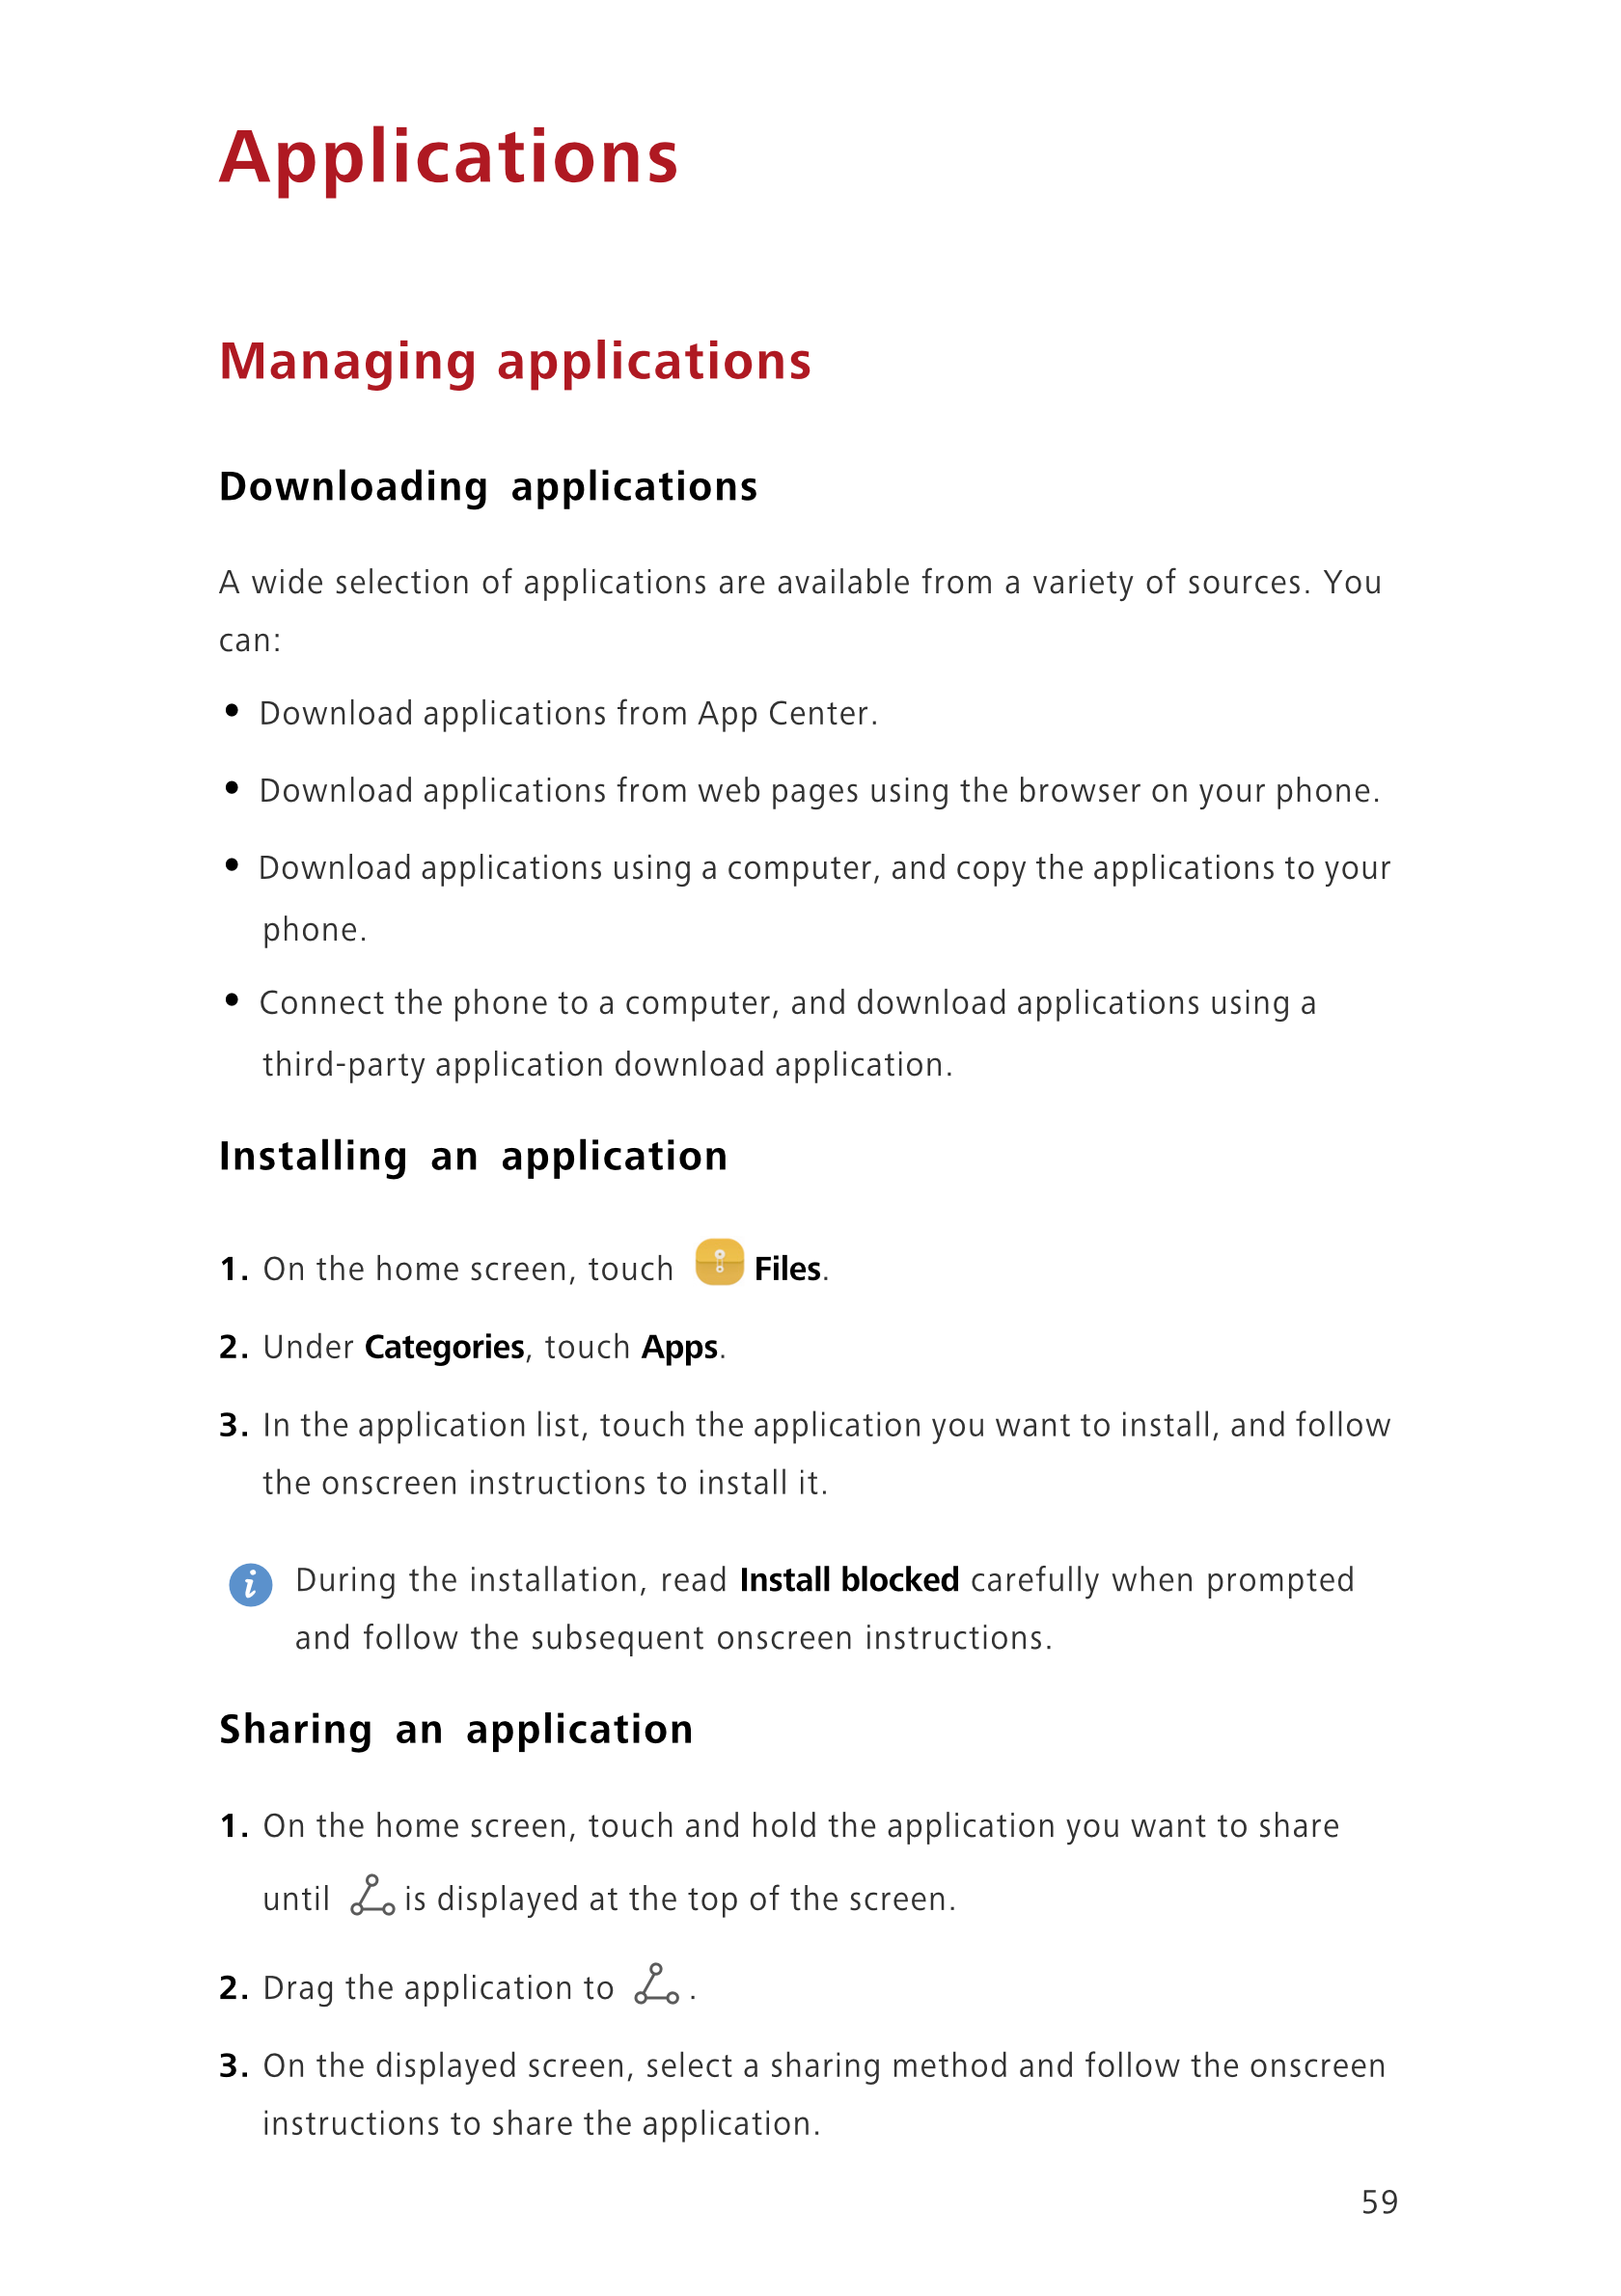 Applications
Managing applications
Downloading applications
A wide selection of applications are available from a variety of sou